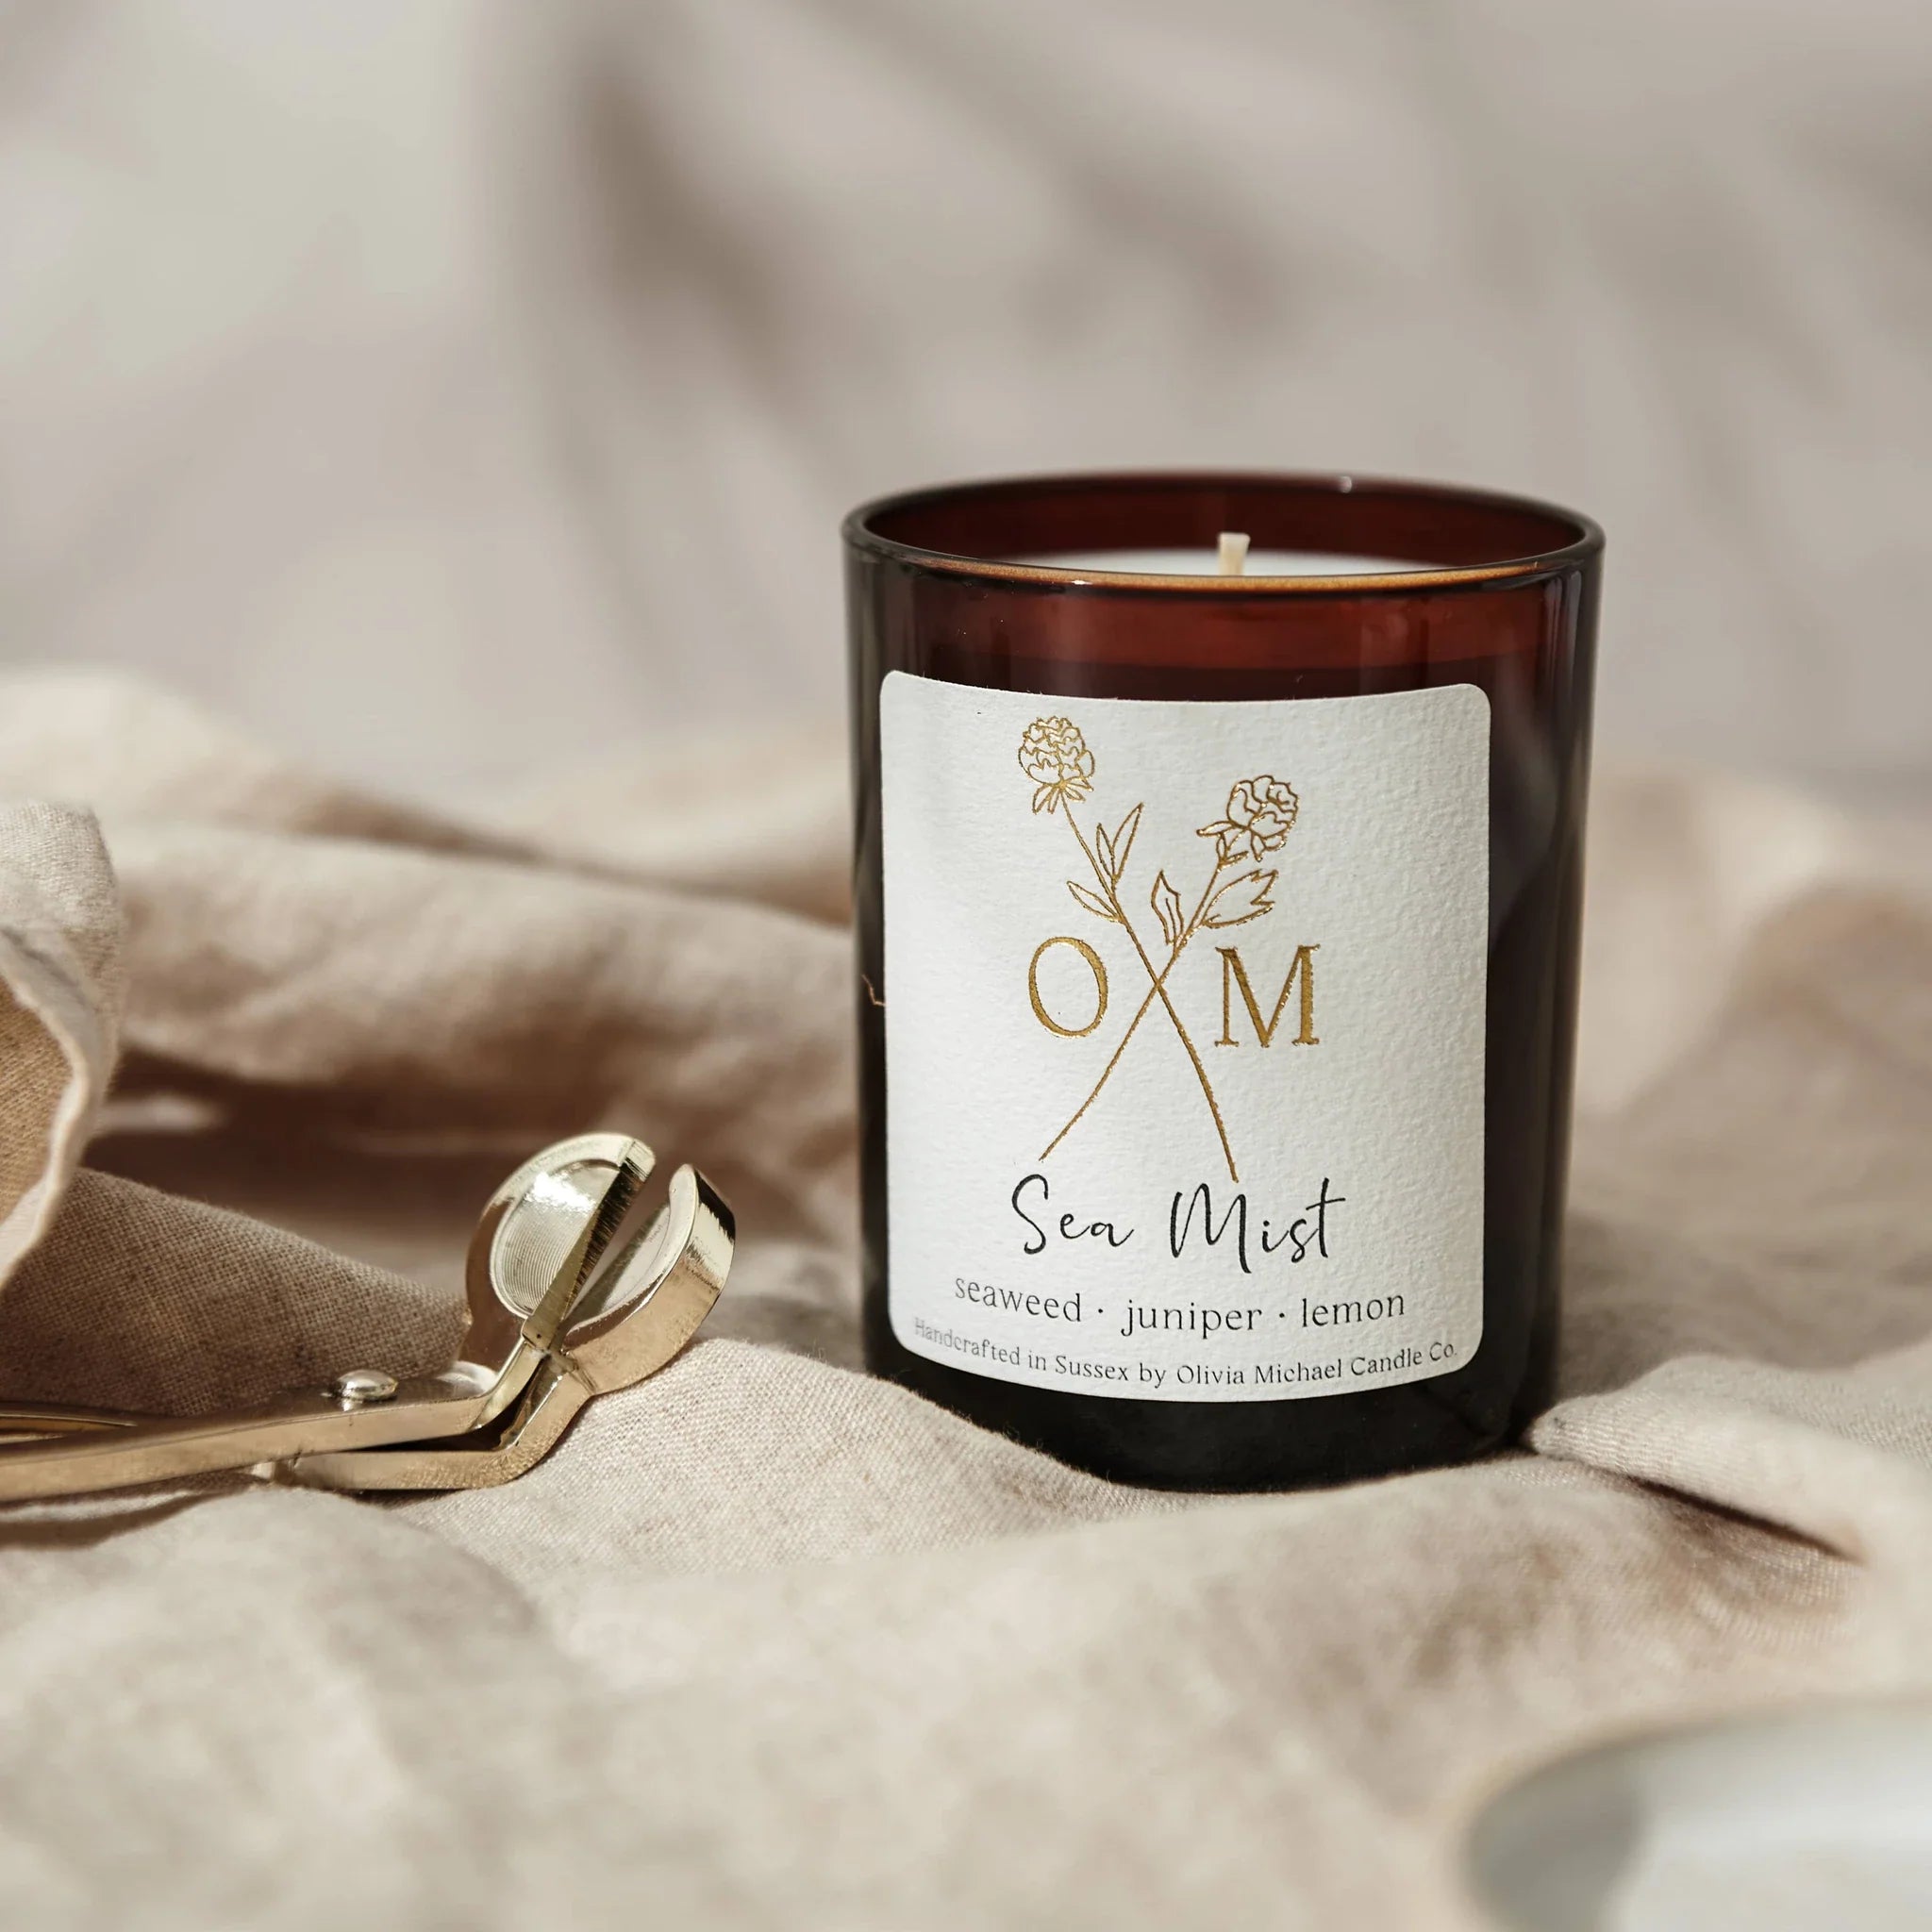 Seaweed and Juniper Scented Candle - Sea Mist